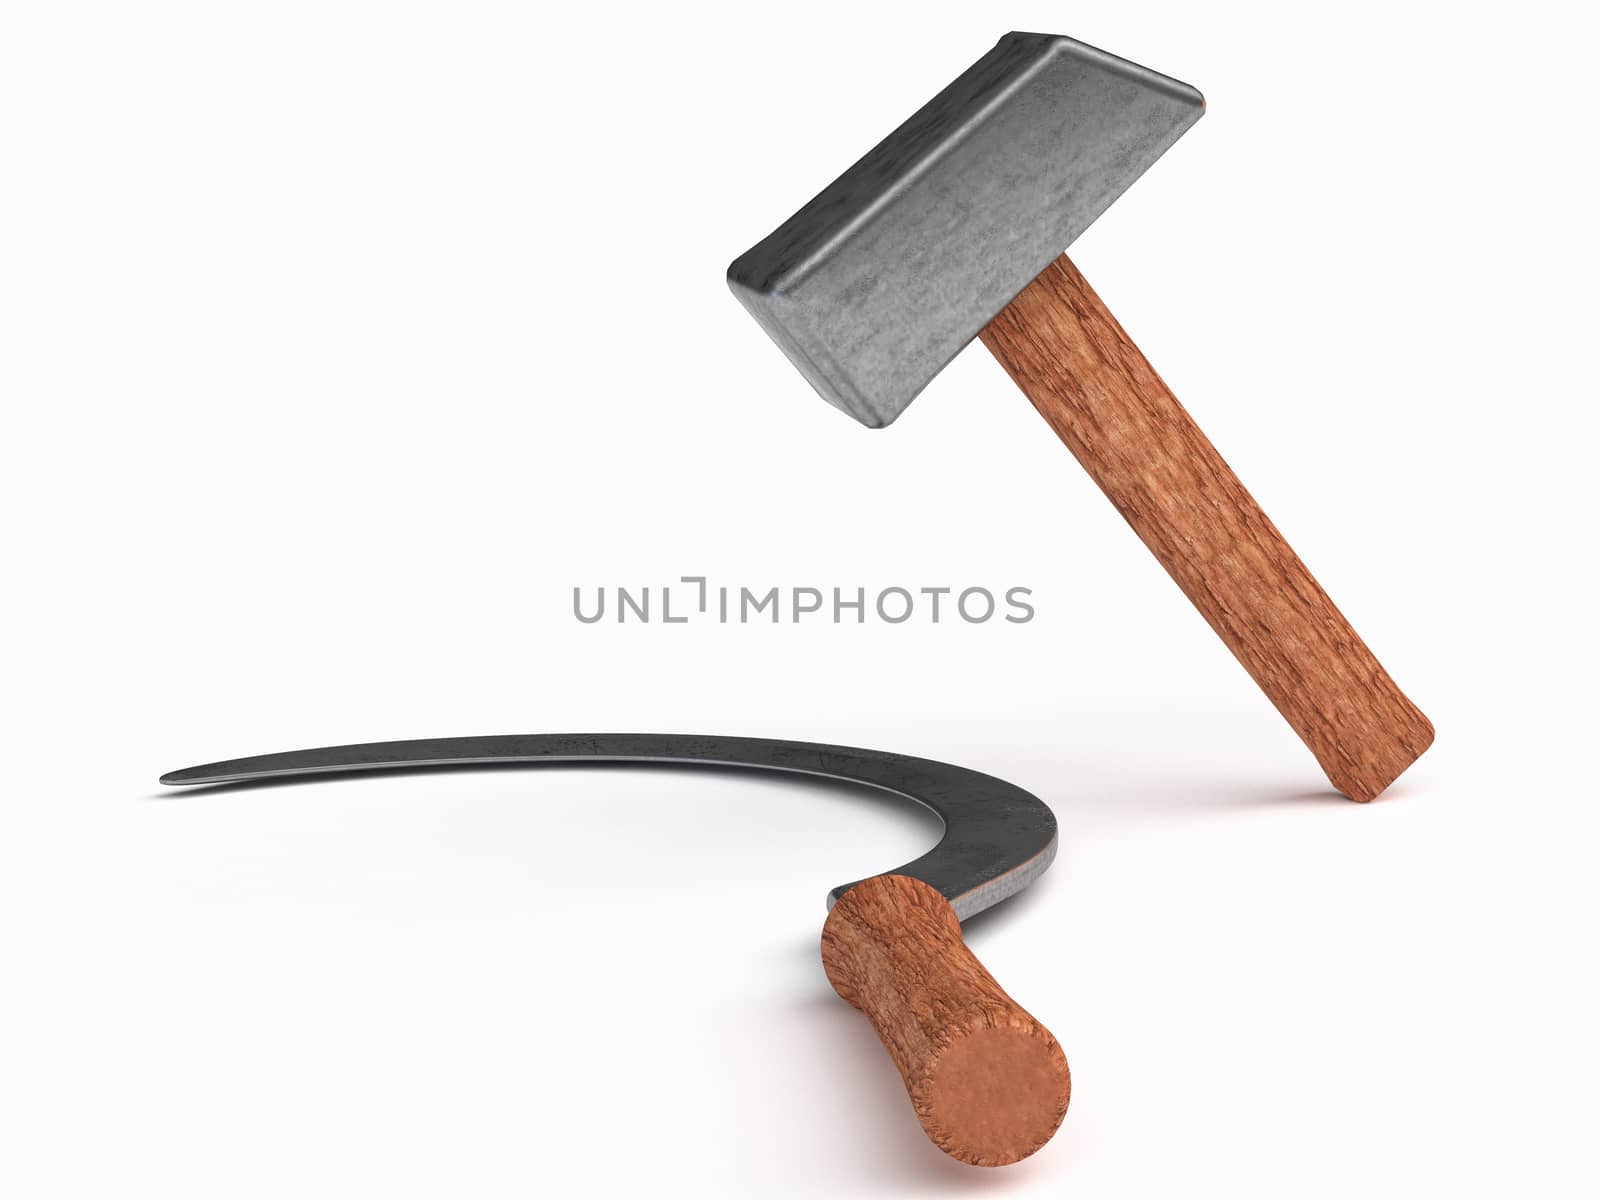 hammer industrial labourers and sickle for peasantry symbol Communist parties; Farm and worker instruments and tools have long been used as symbols for proletarian struggle.